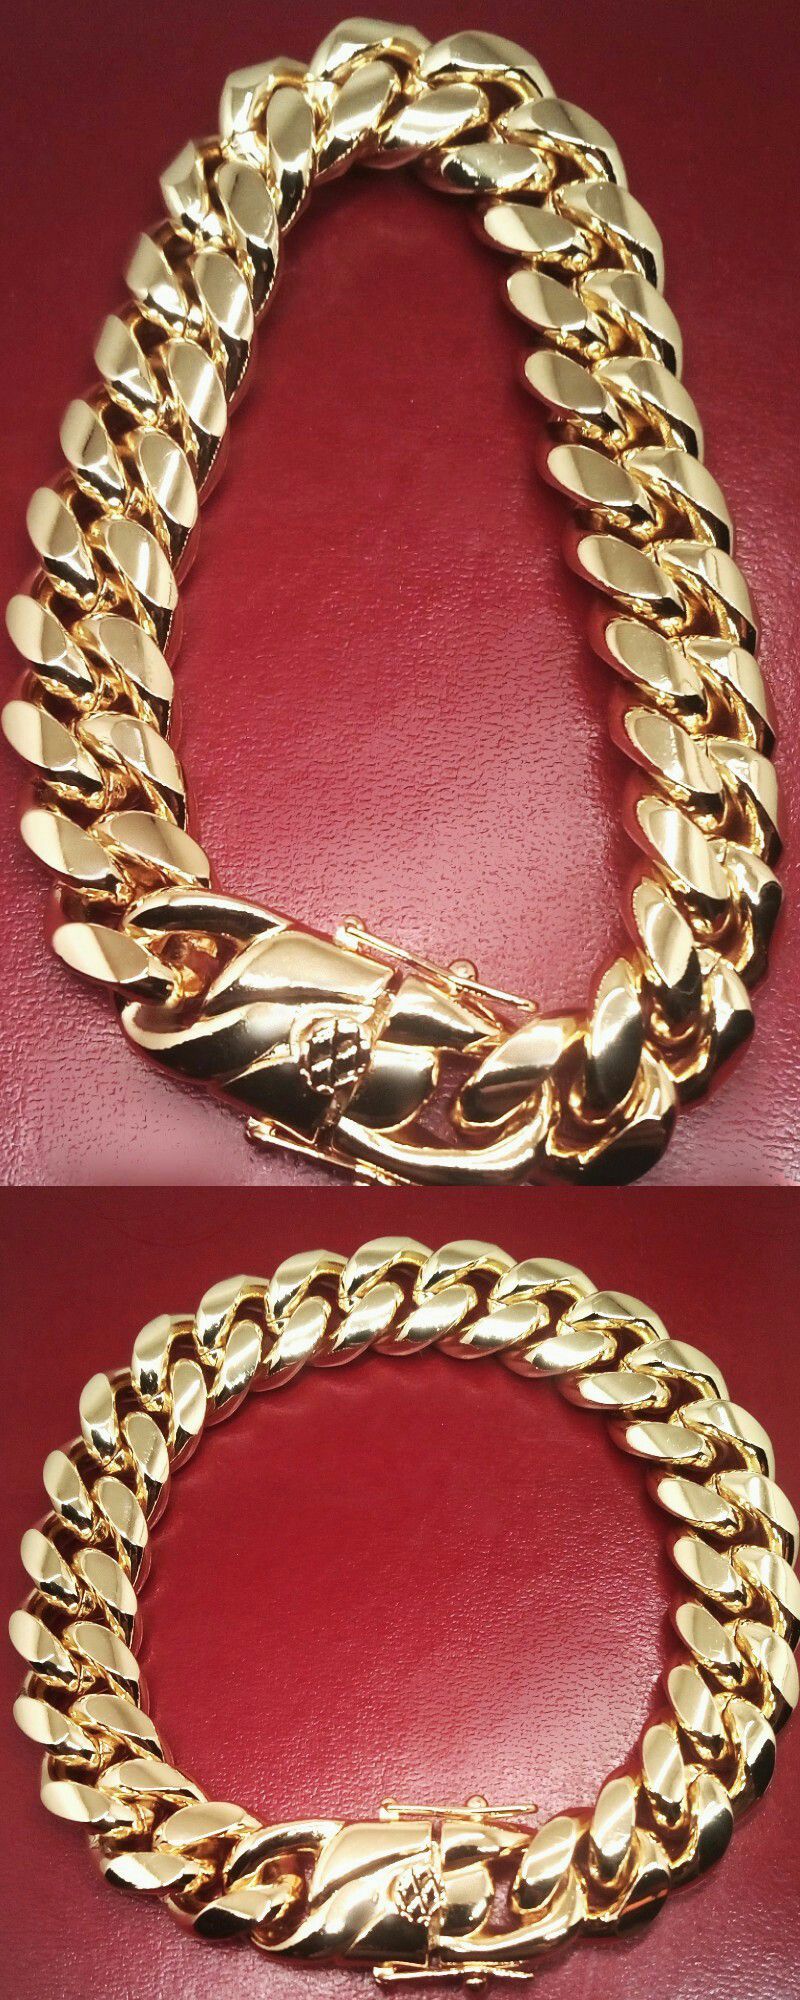 18K Gold Bonded Stainless Steel 14mm Cuban Link Chain Bracelet 8"or 9" New in Gift Box